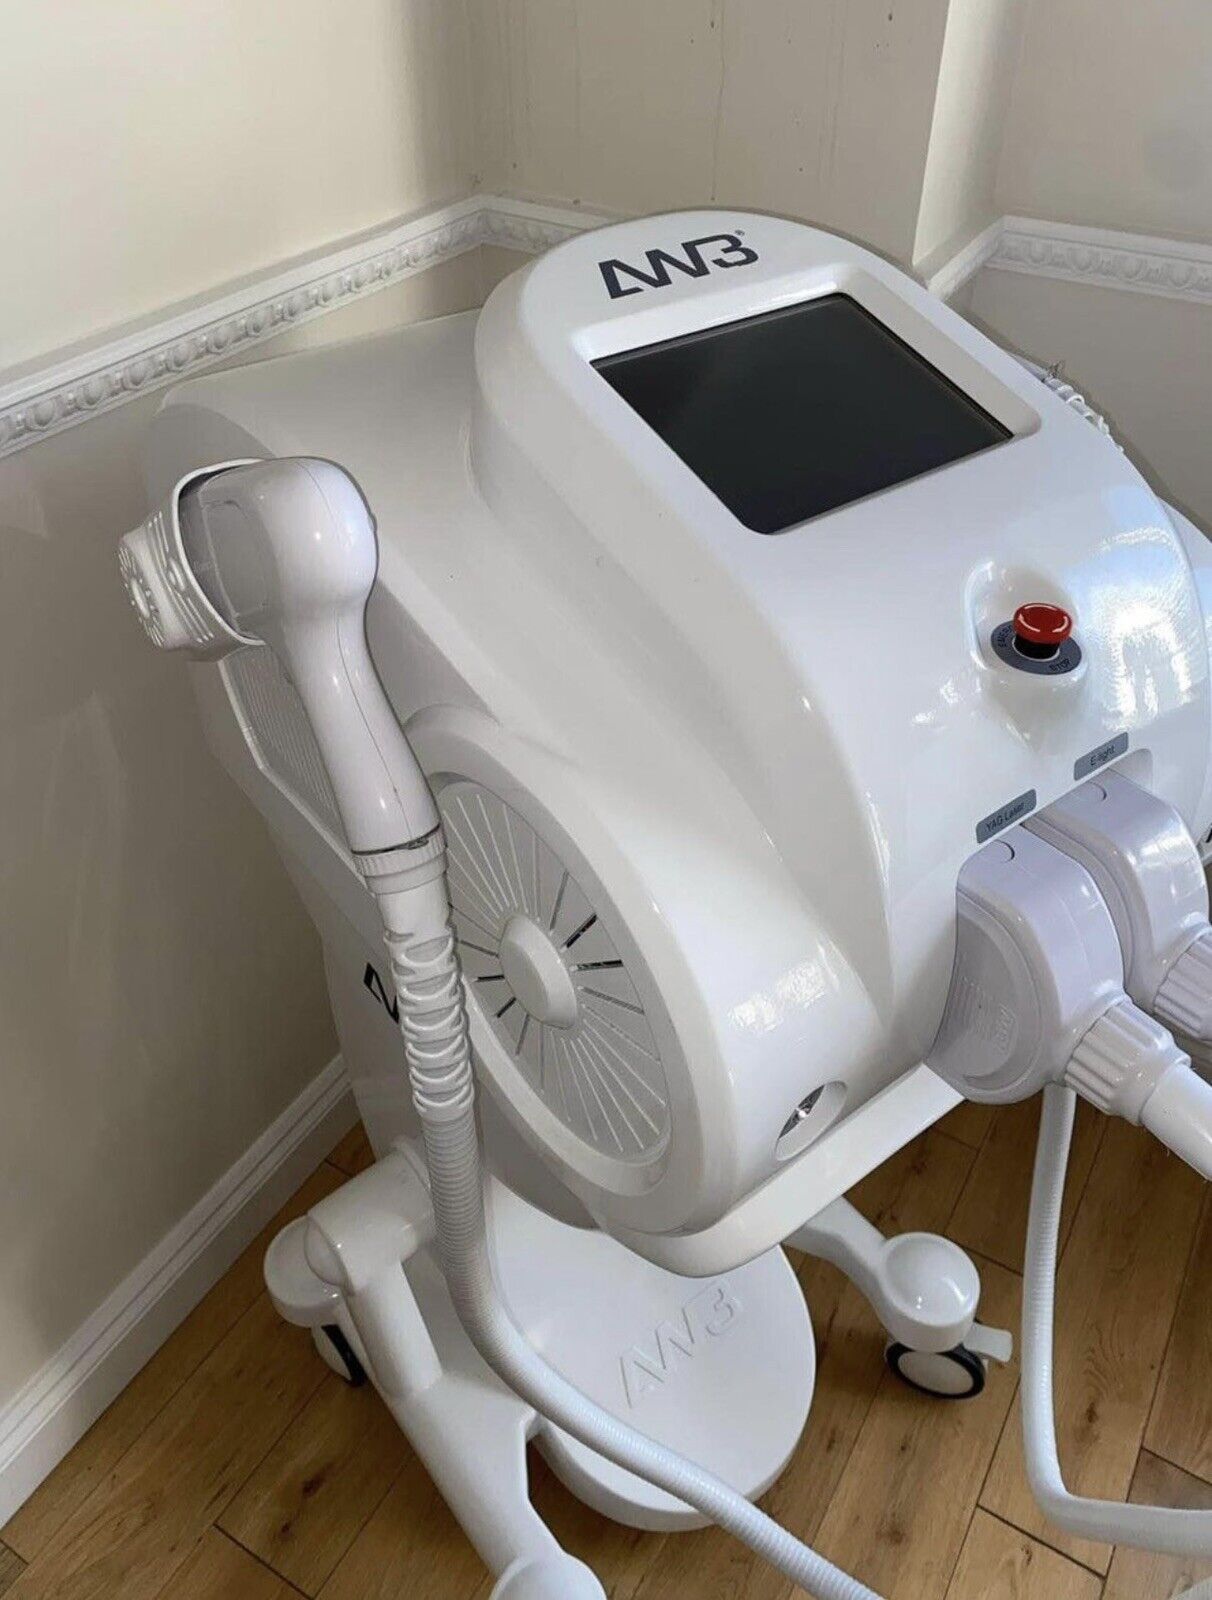 AW3 IPL Laser hair and tattoo removal machine